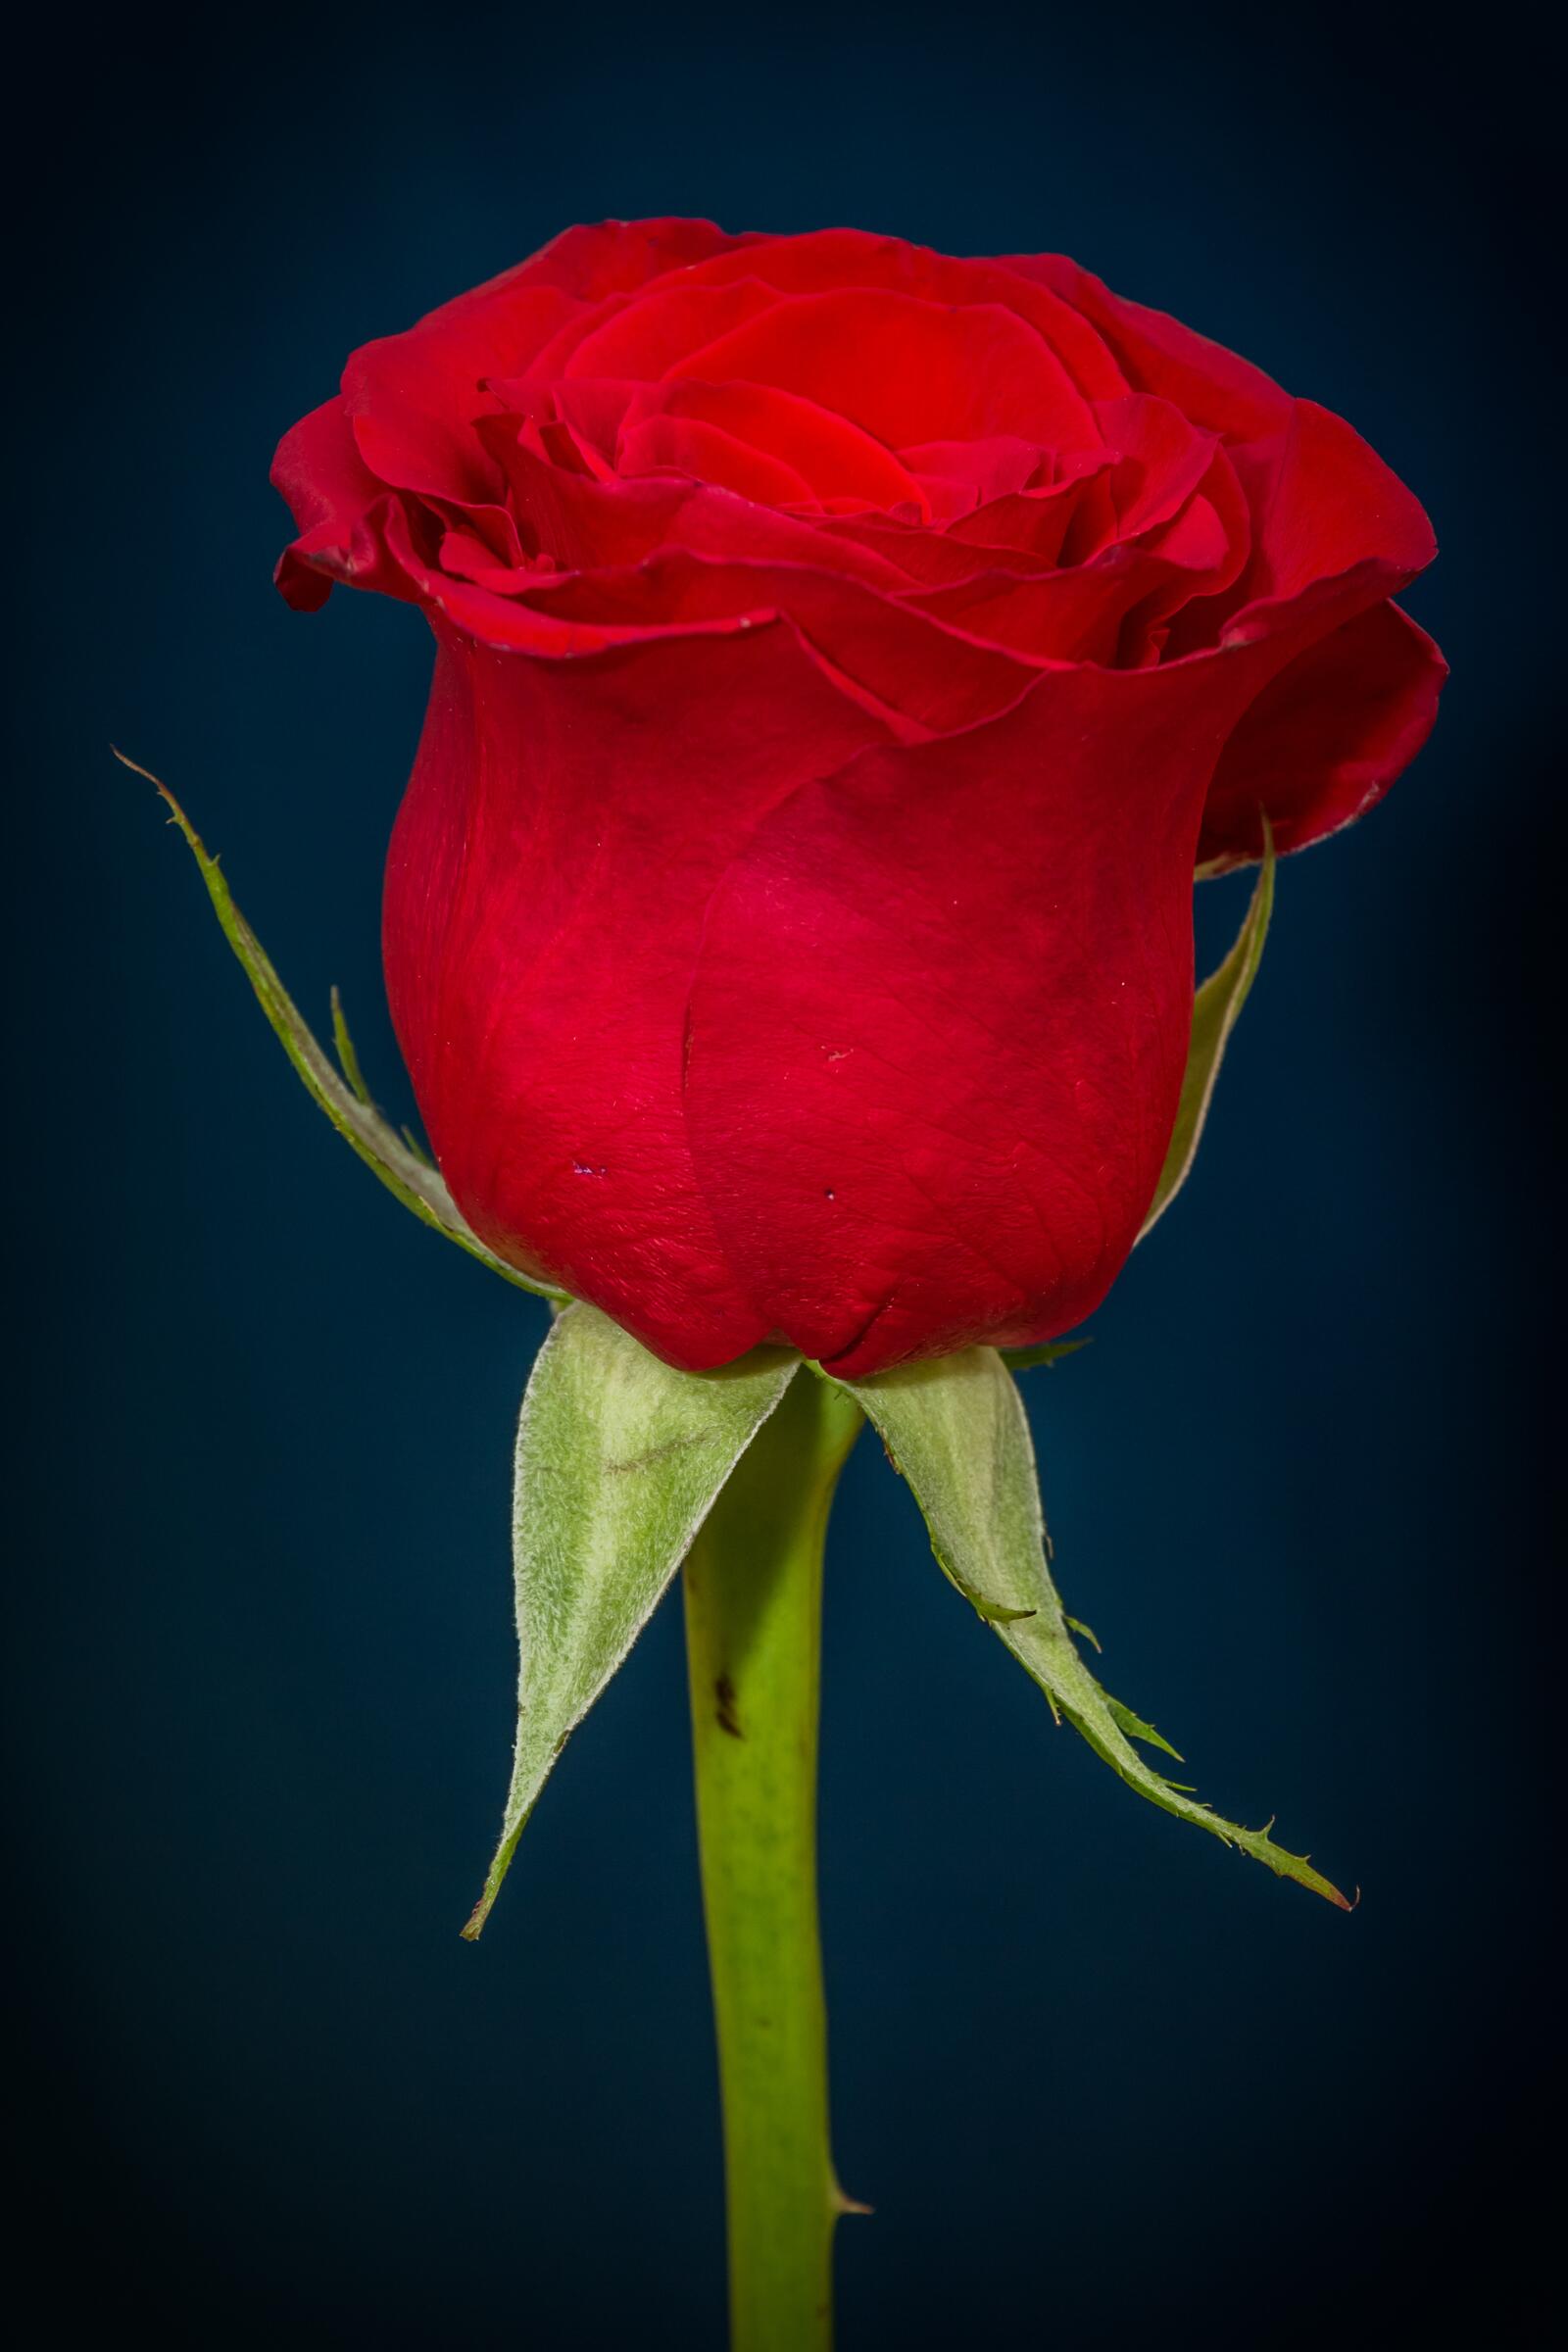 Free photo A single red rose on a dark background